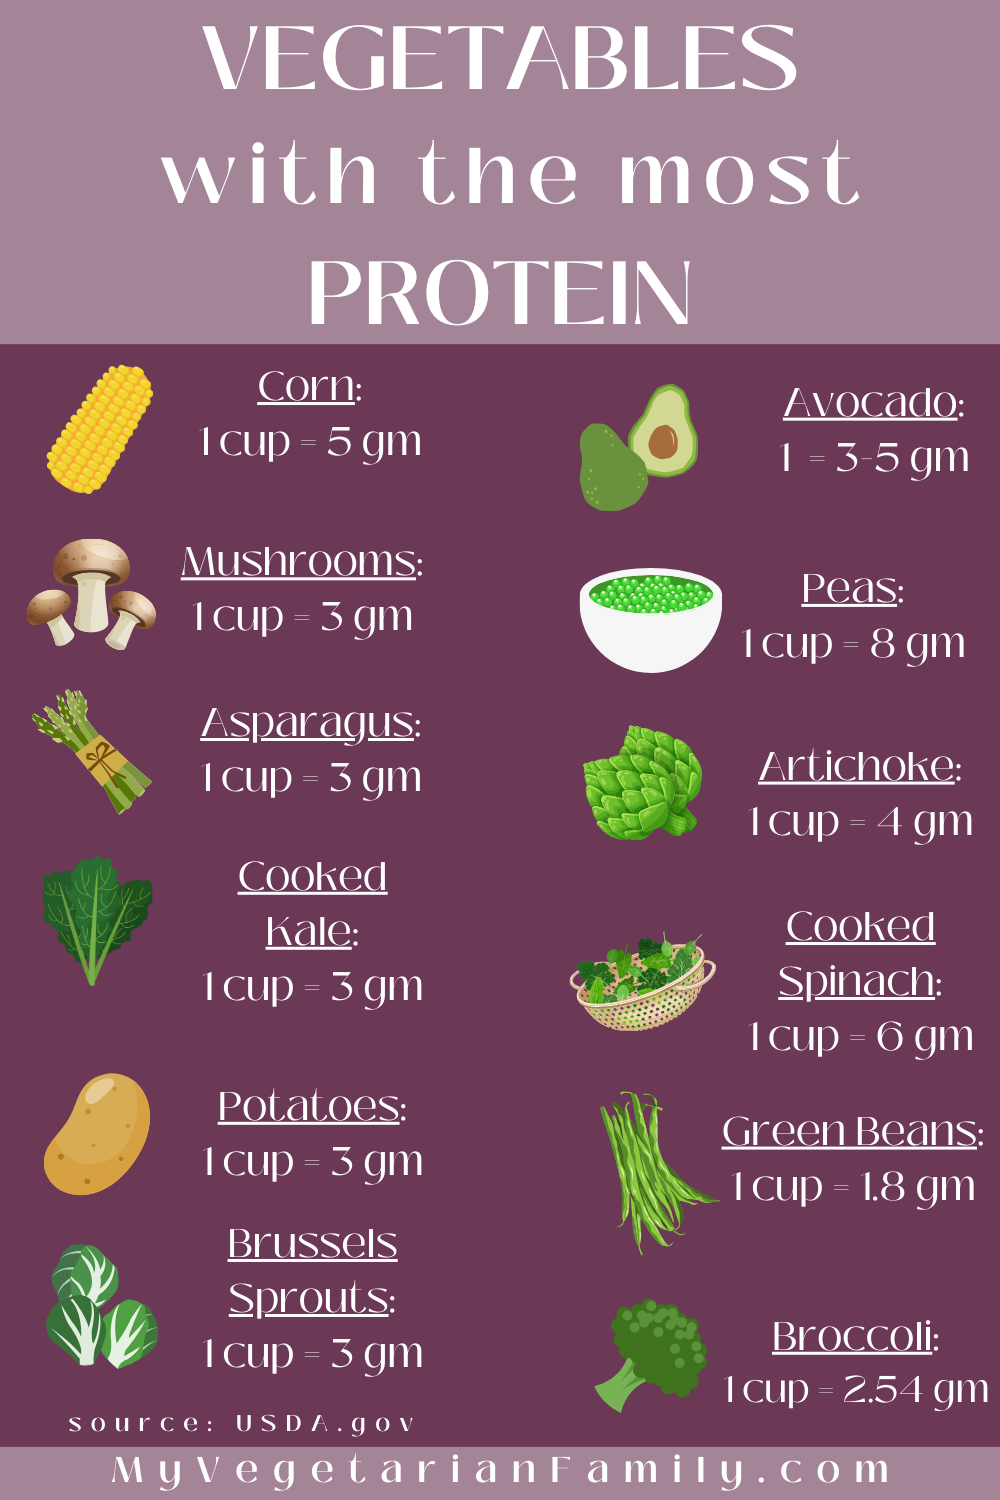 Vegetables With The Most Protein | Tara's Tuesday Tips | My Vegetarian Family #vegetableswithprotein